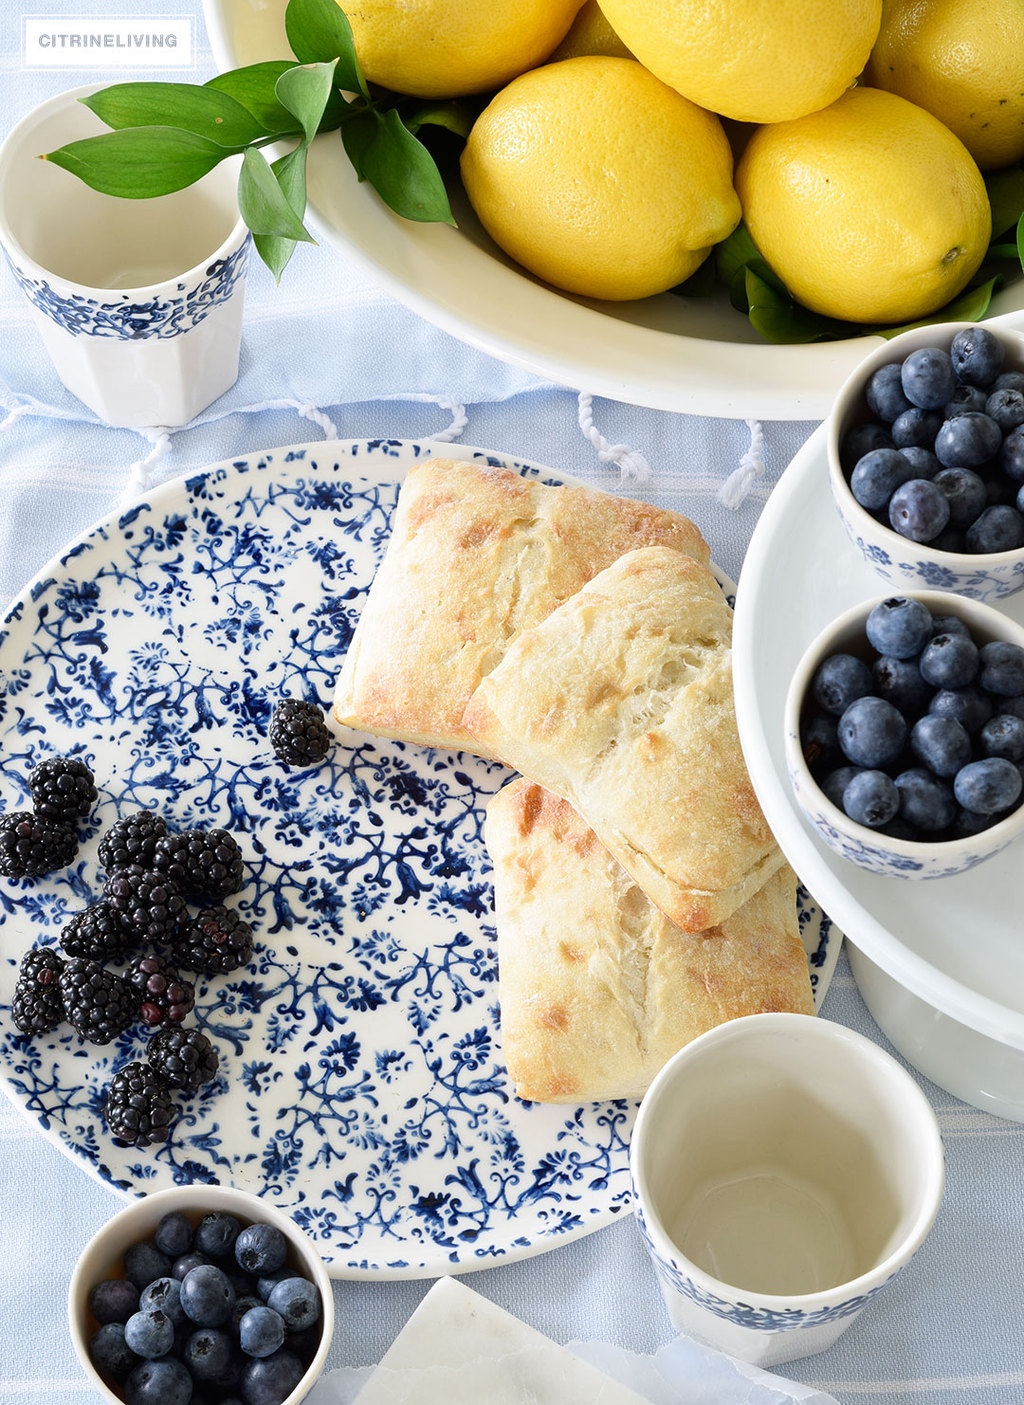 Create a welcoming tablescape of blue and white accented with fresh lemons.